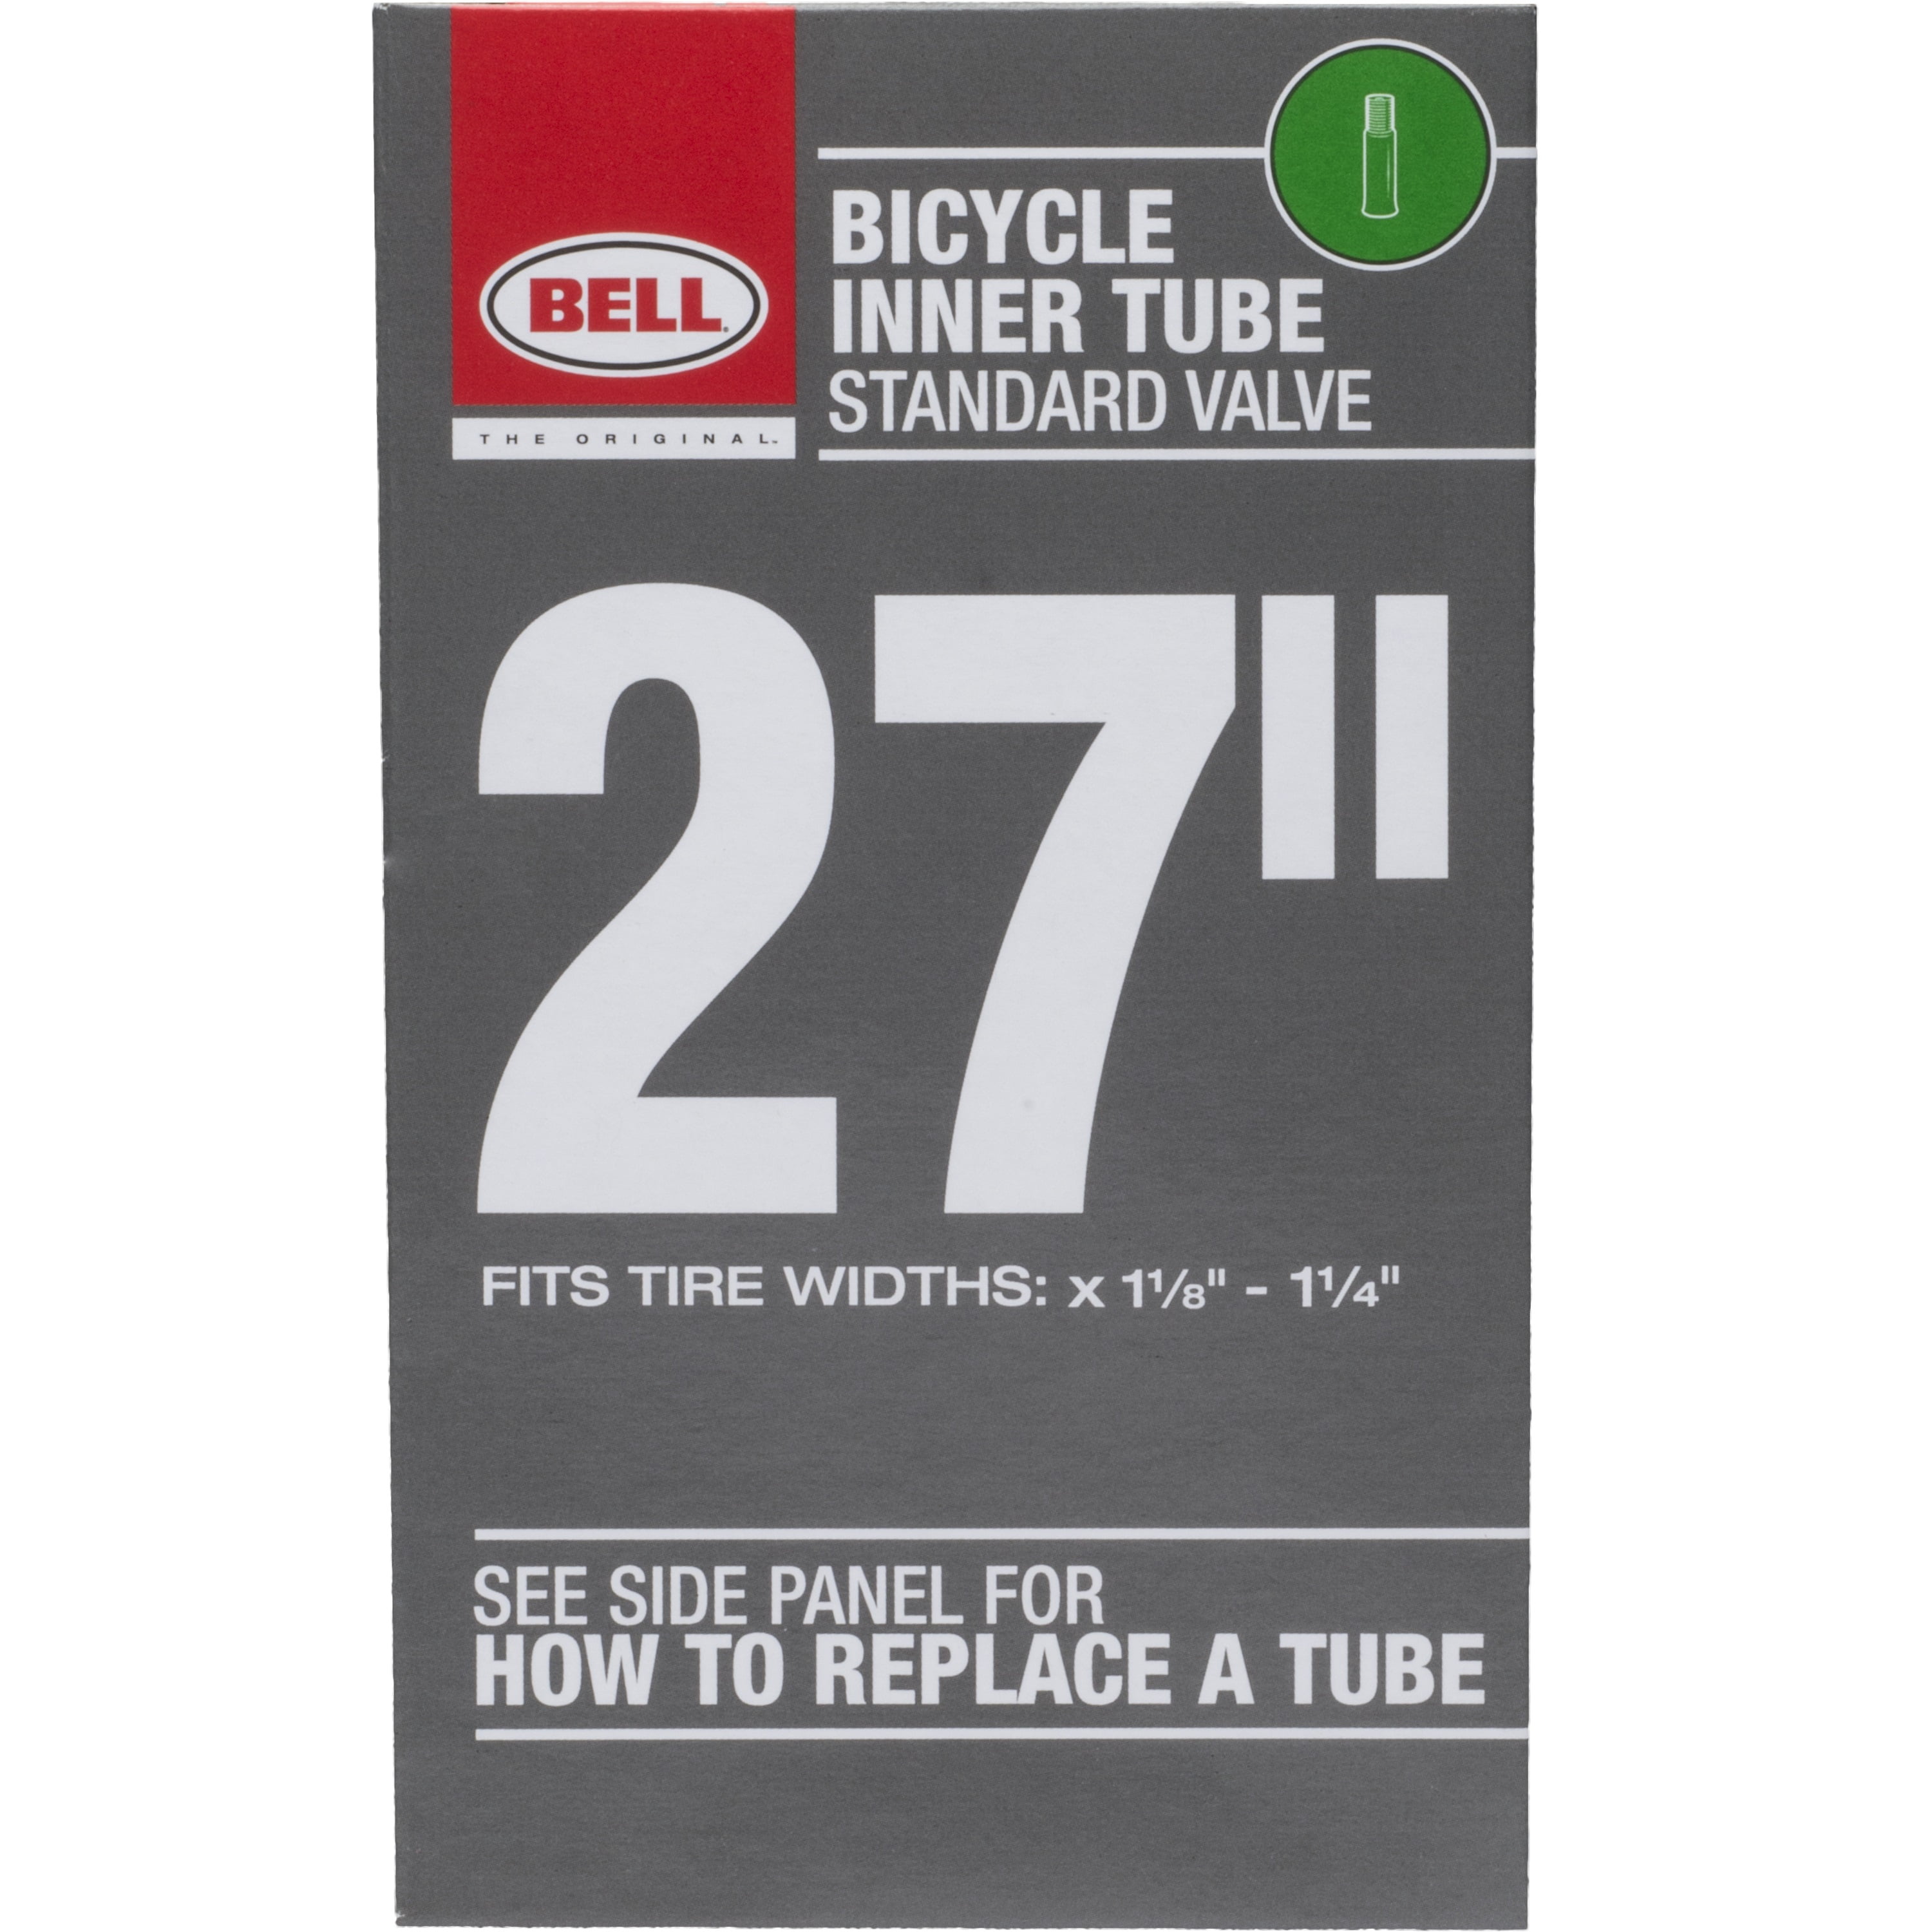 4 Bell 26" Bicycle Inner Tube Fits Tire Widths X 1.75-2.25 Standard Valve for sale online 